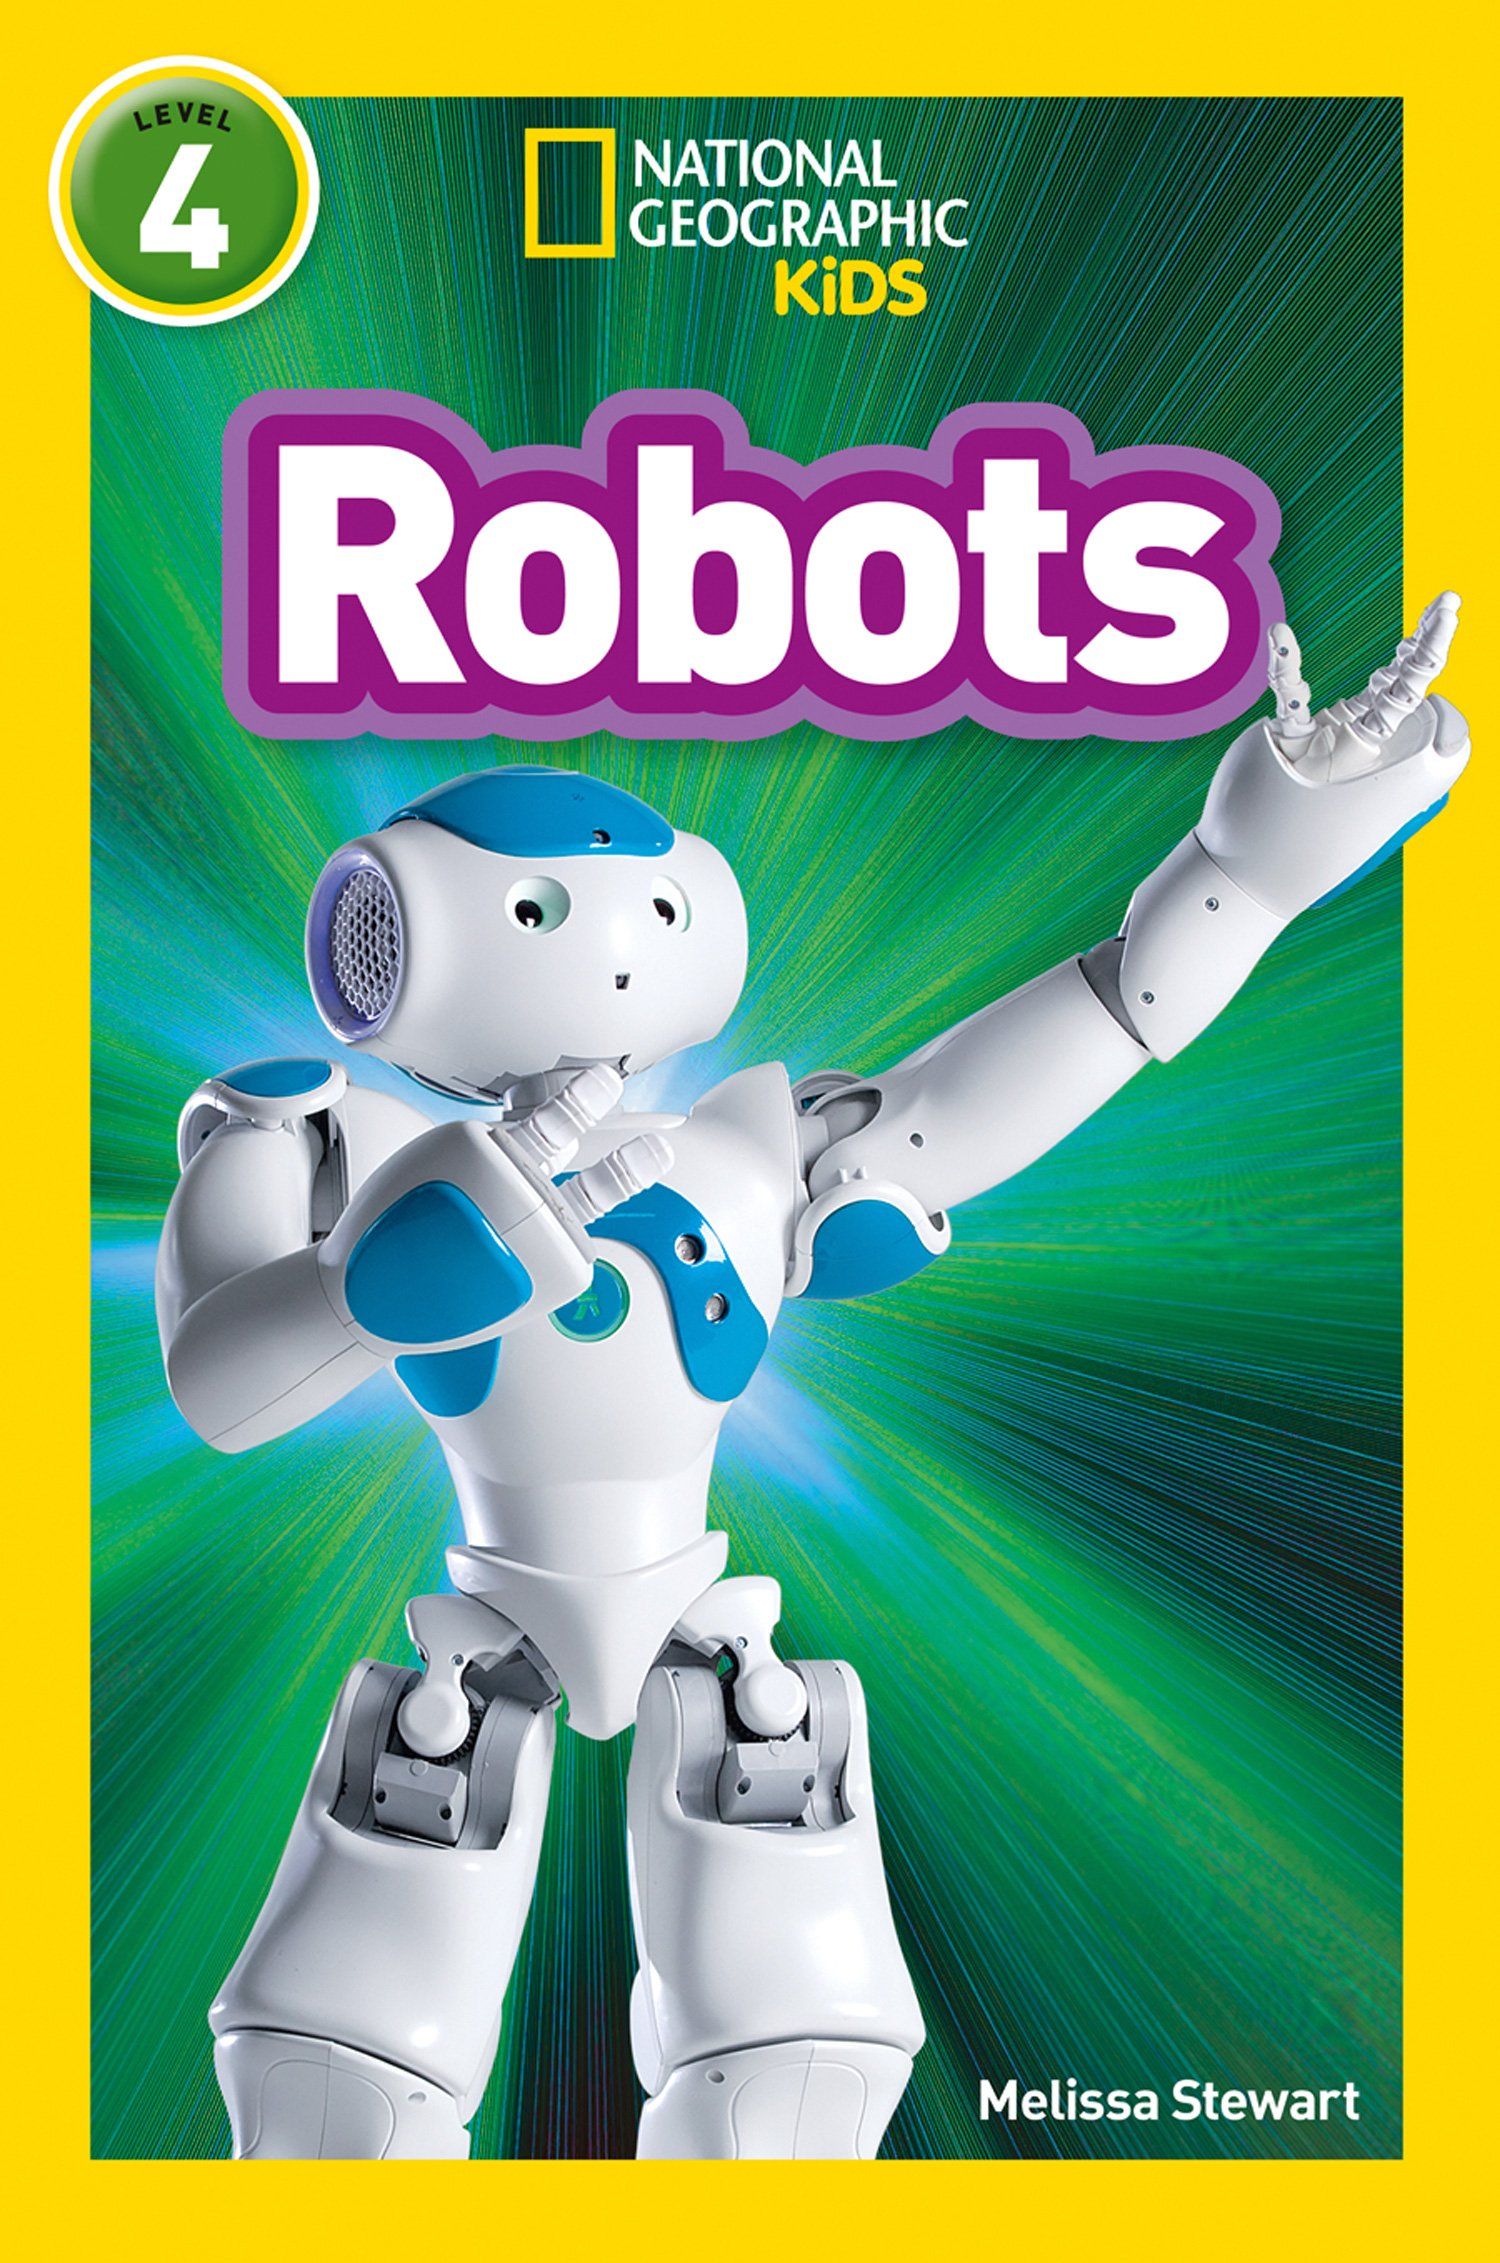 National Geographic Robots cover